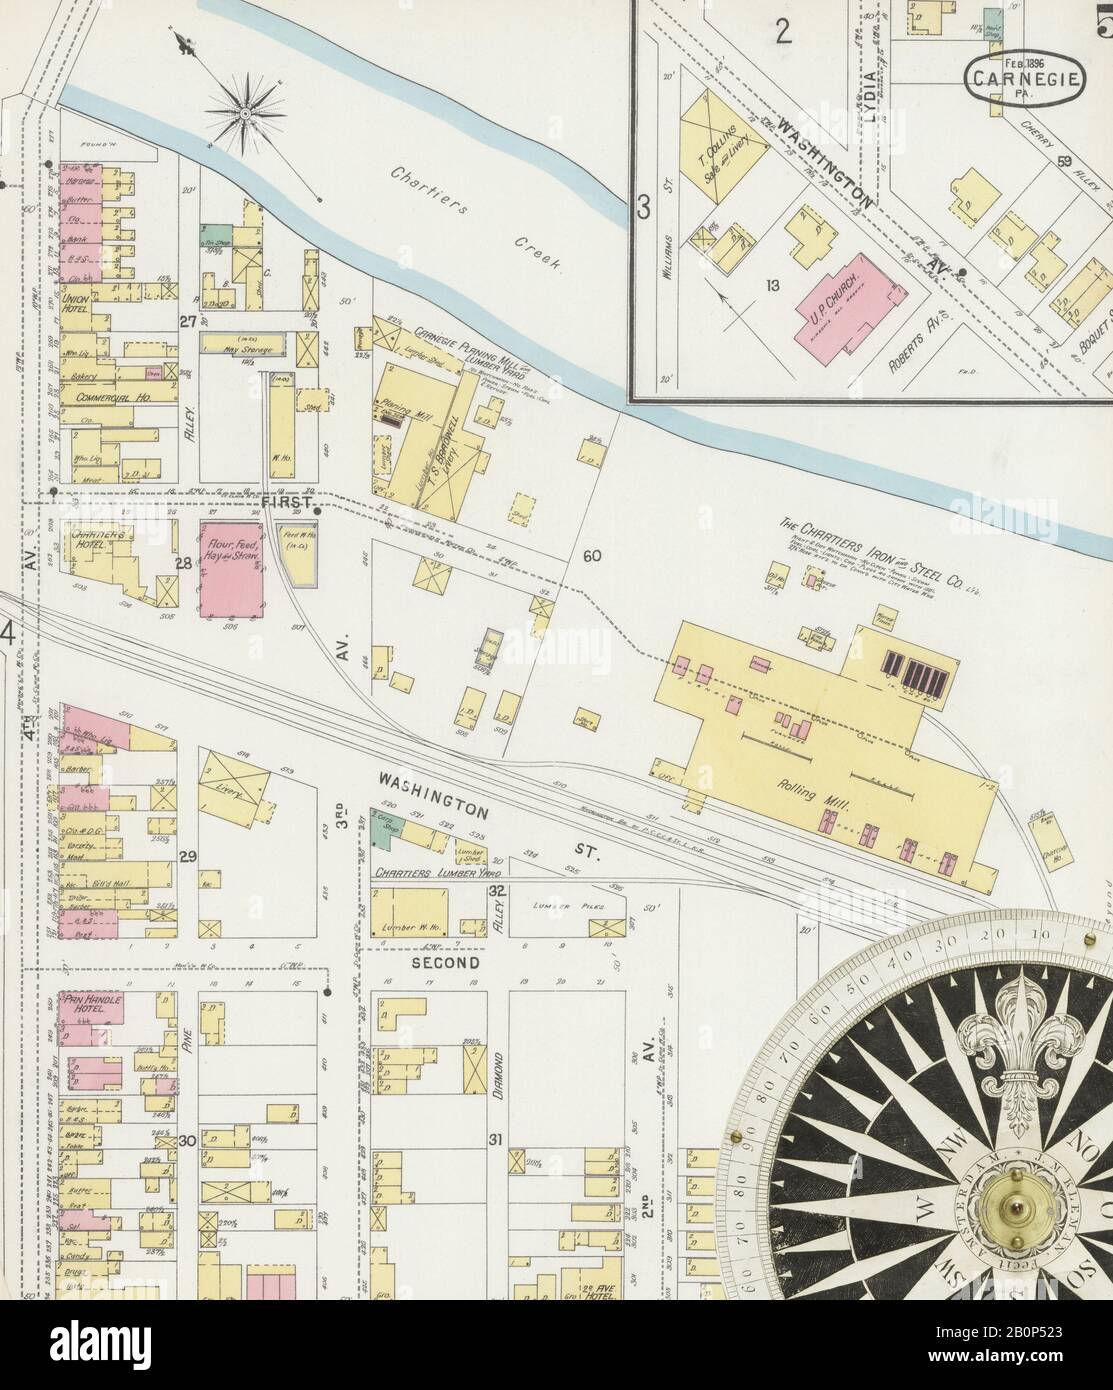 Image 5 of Sanborn Fire Insurance Map from Carnegie, Allegheny County, Pennsylvania. Feb 1896. 6 Sheet(s), America, street map with a Nineteenth Century compass Stock Photo